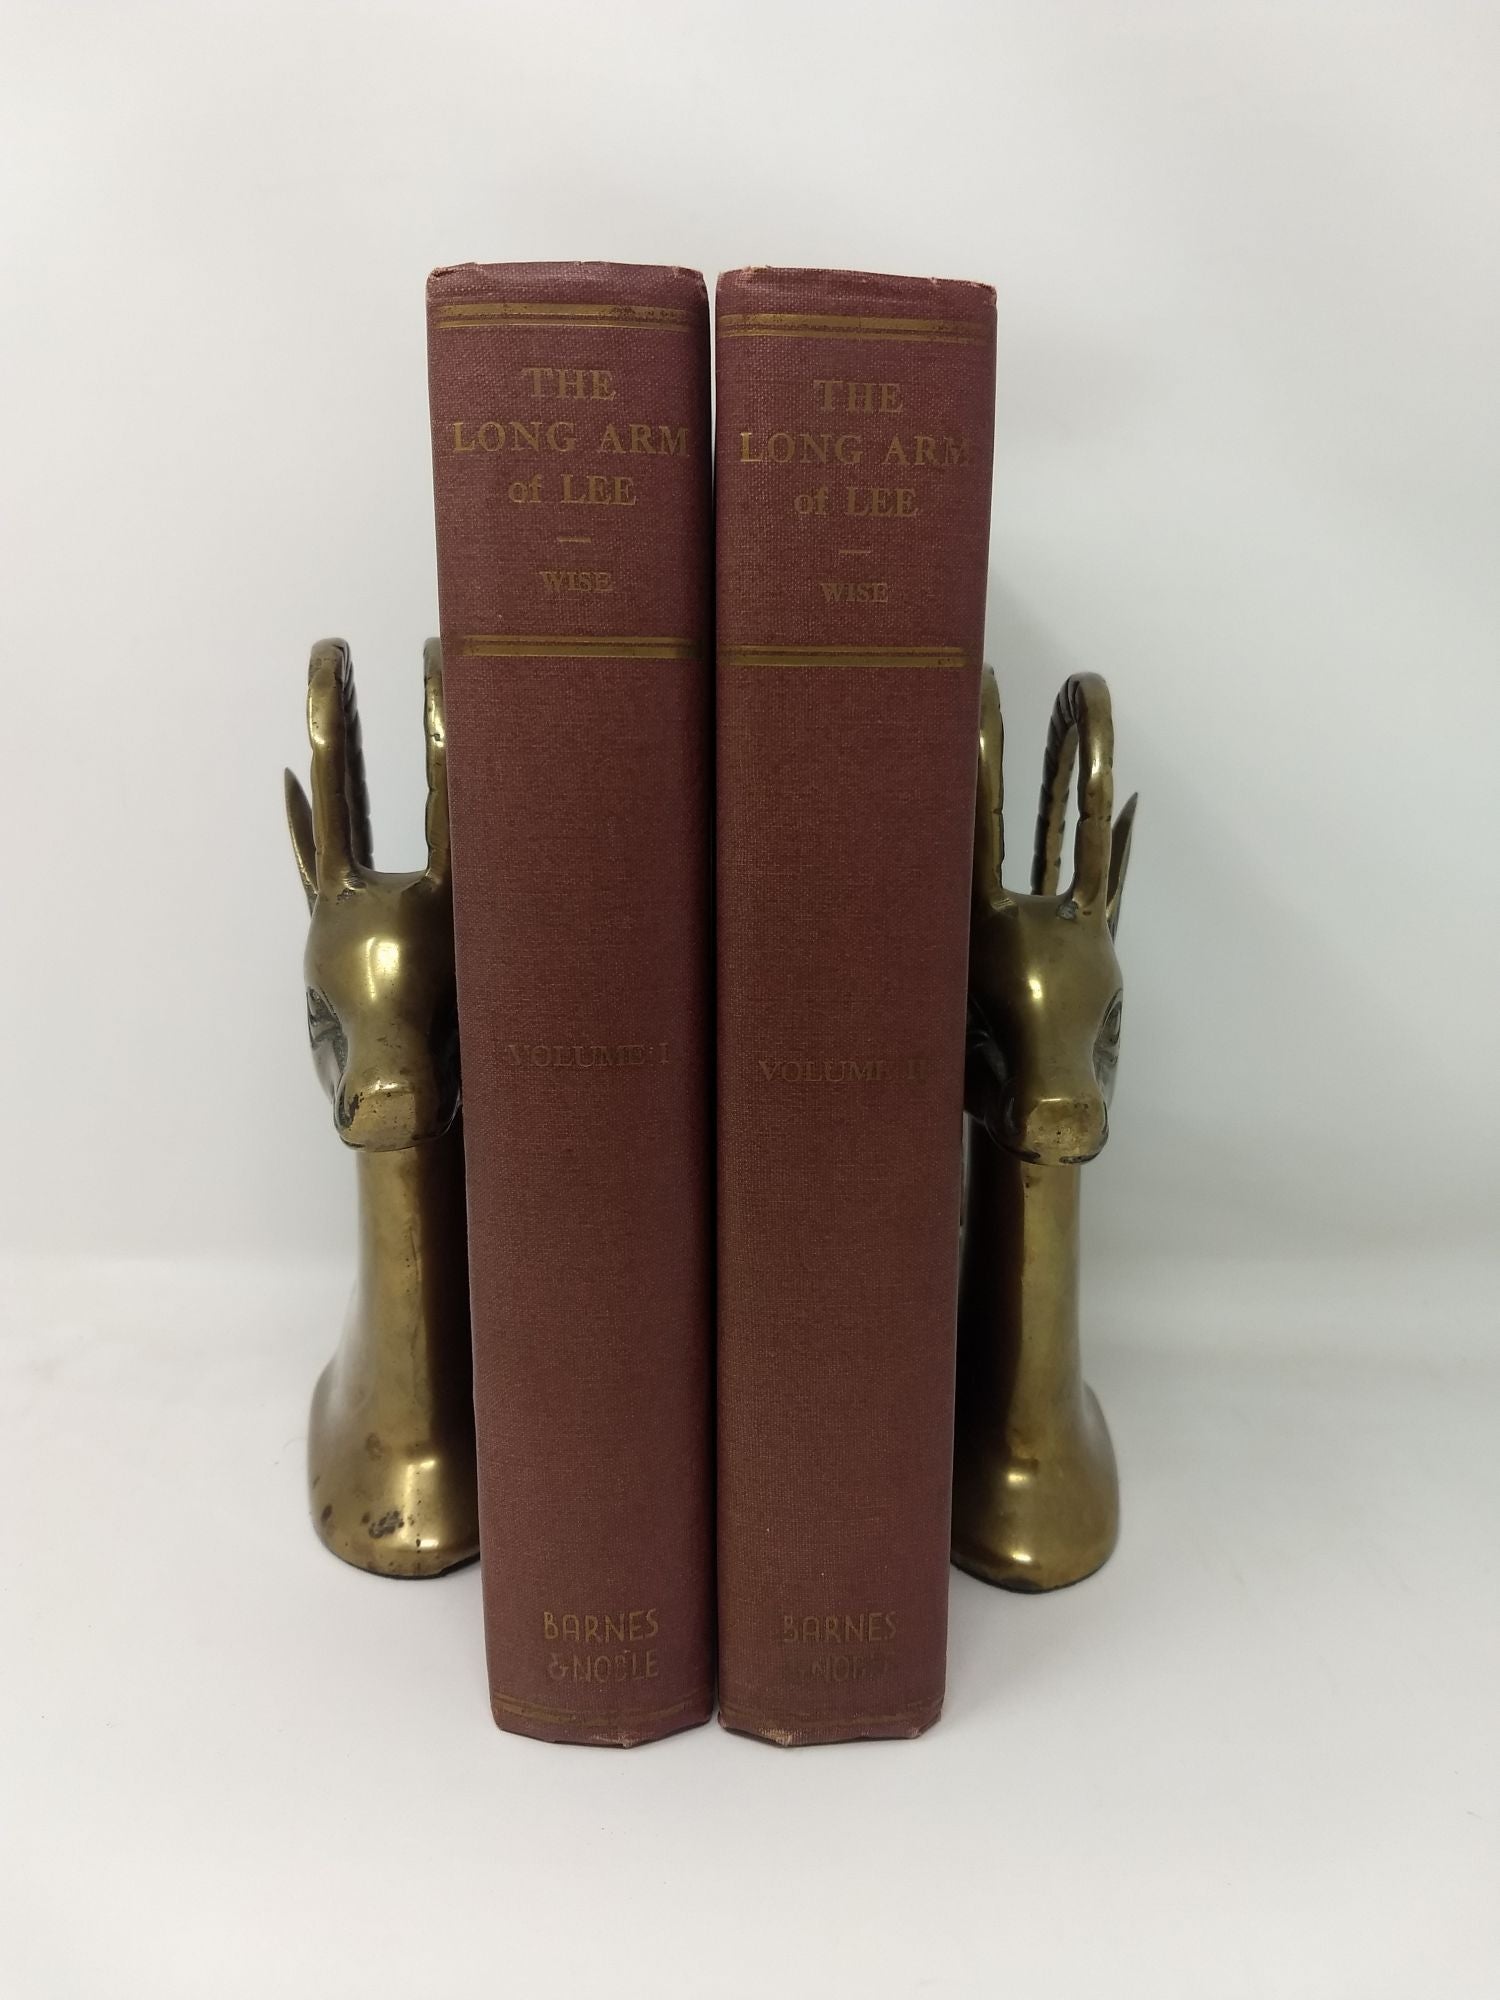 Wise, Jennings Cropper - The Long Arm of Lee, or the History of the Artillery of the Army of Northern Virginia (Two Volumes, Complete); Illustrated